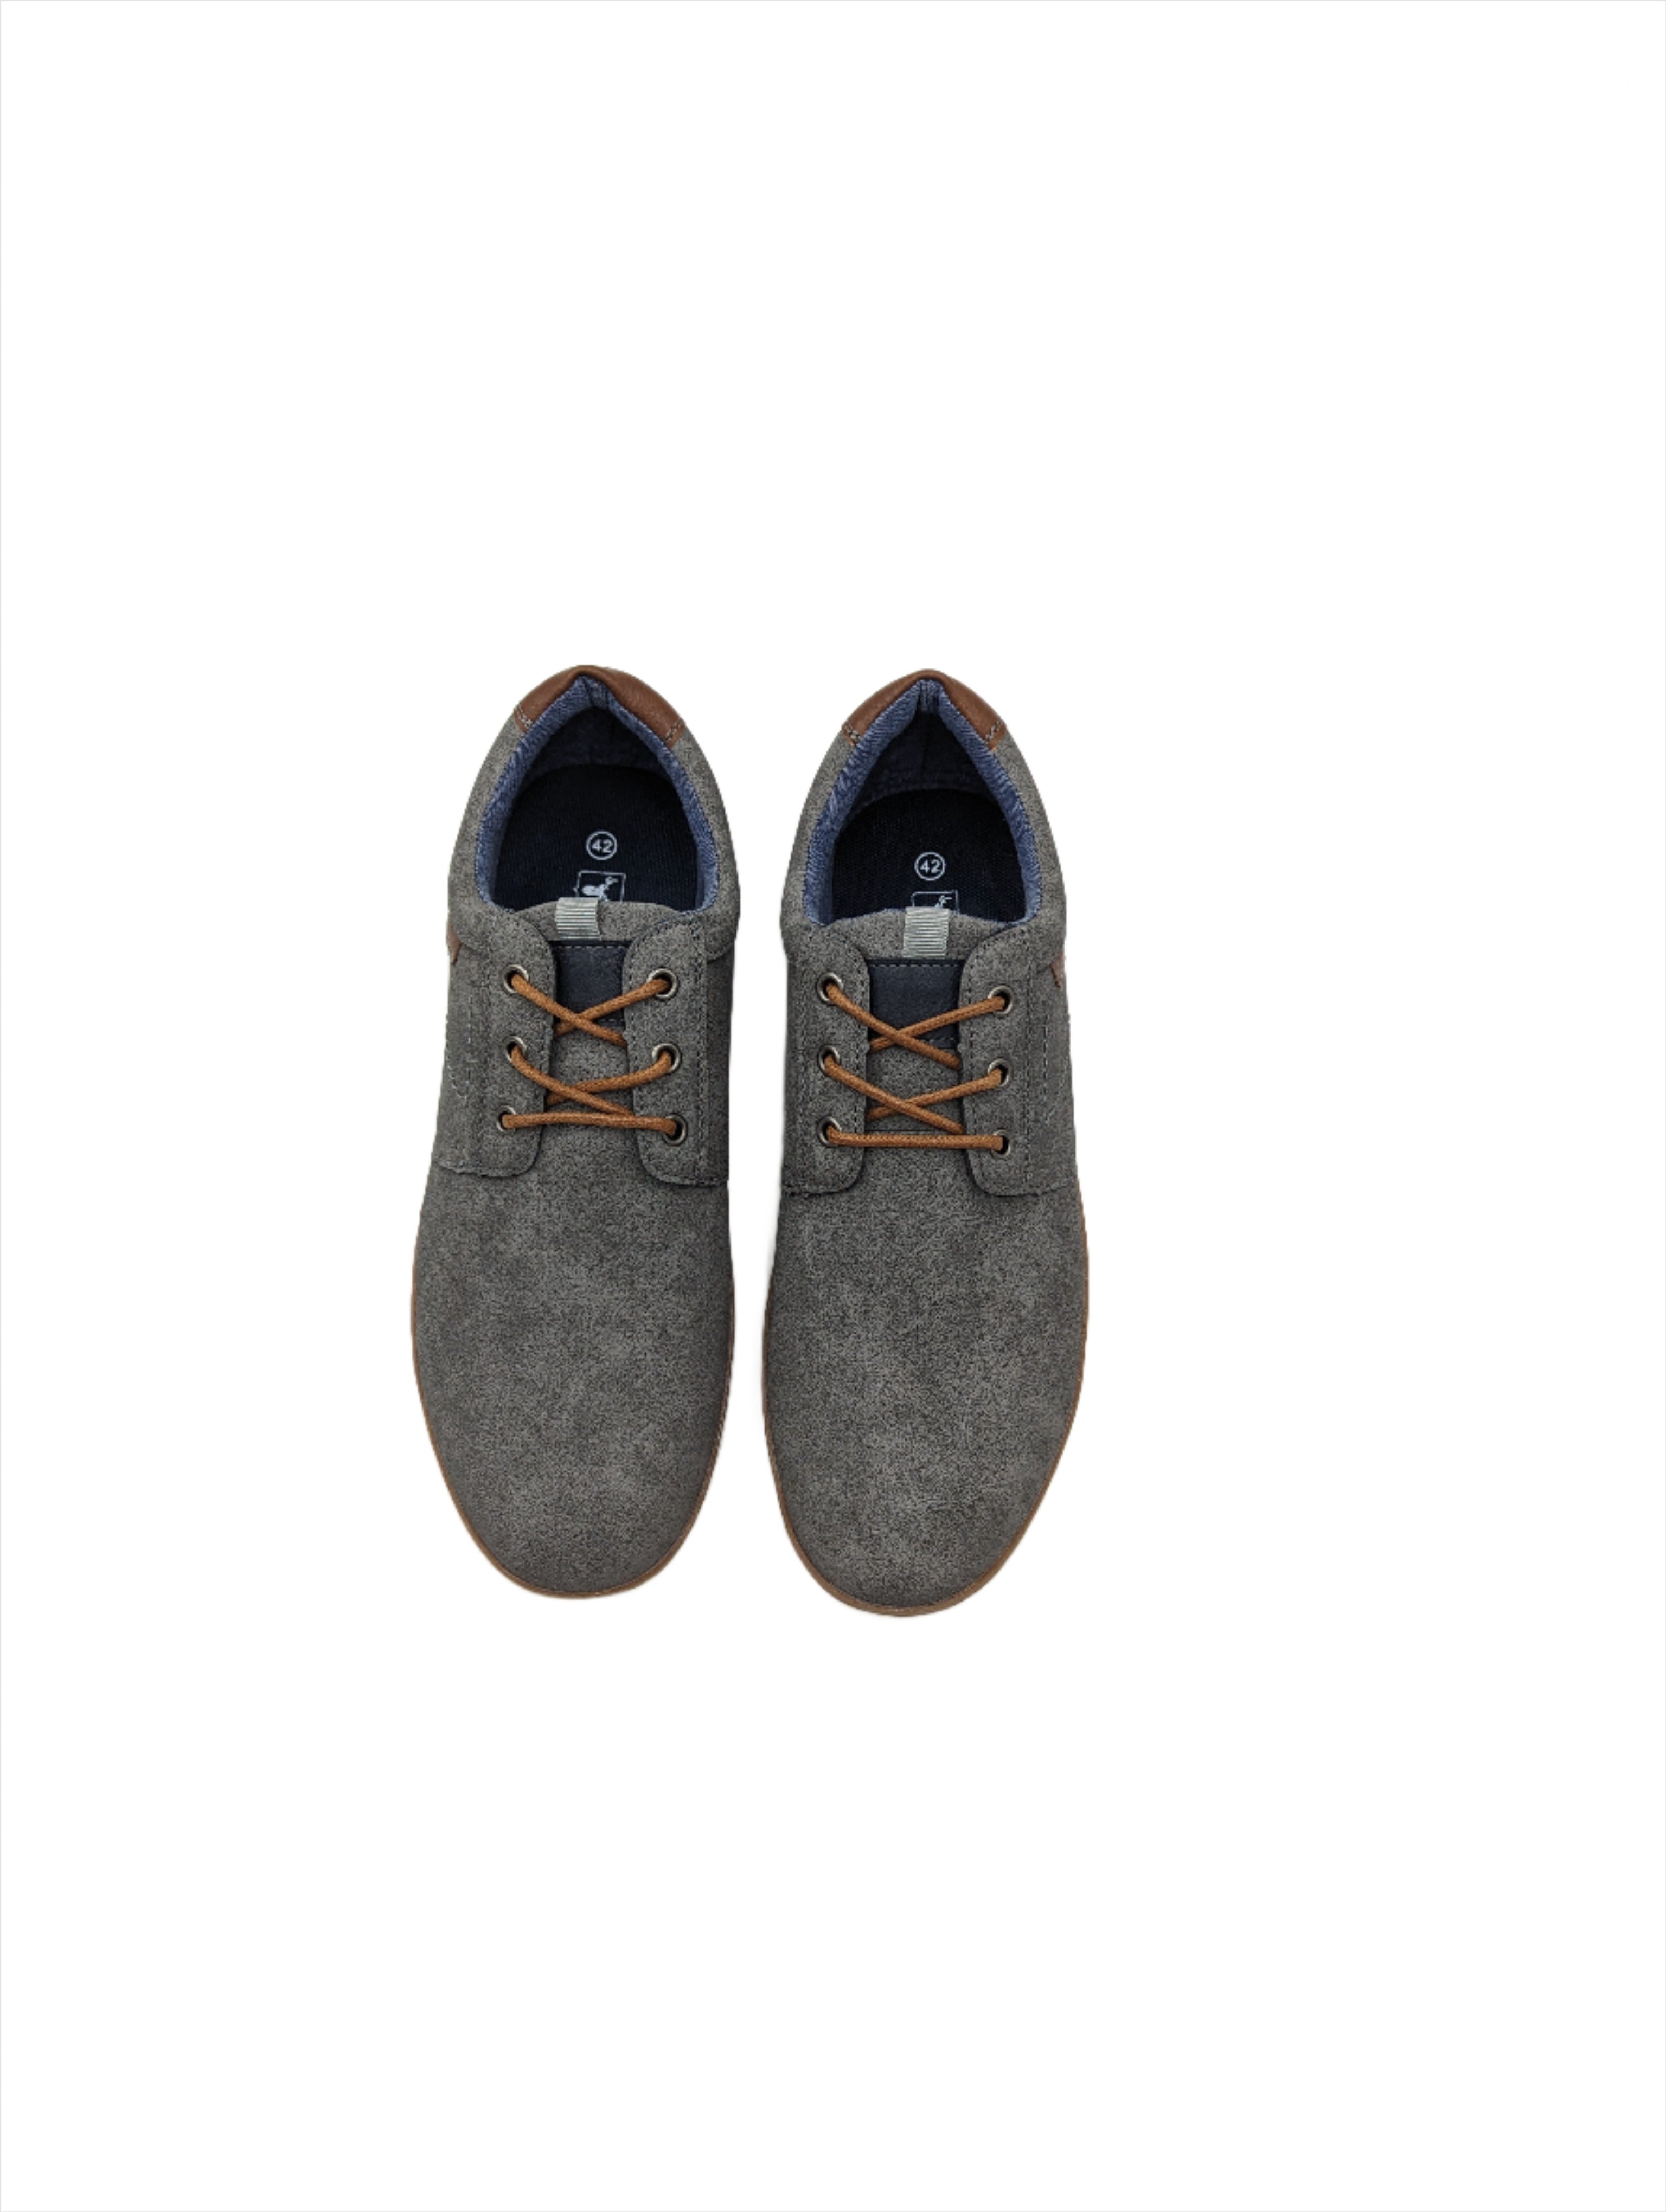 Arno Grey Lace Up Shoe-Top down view